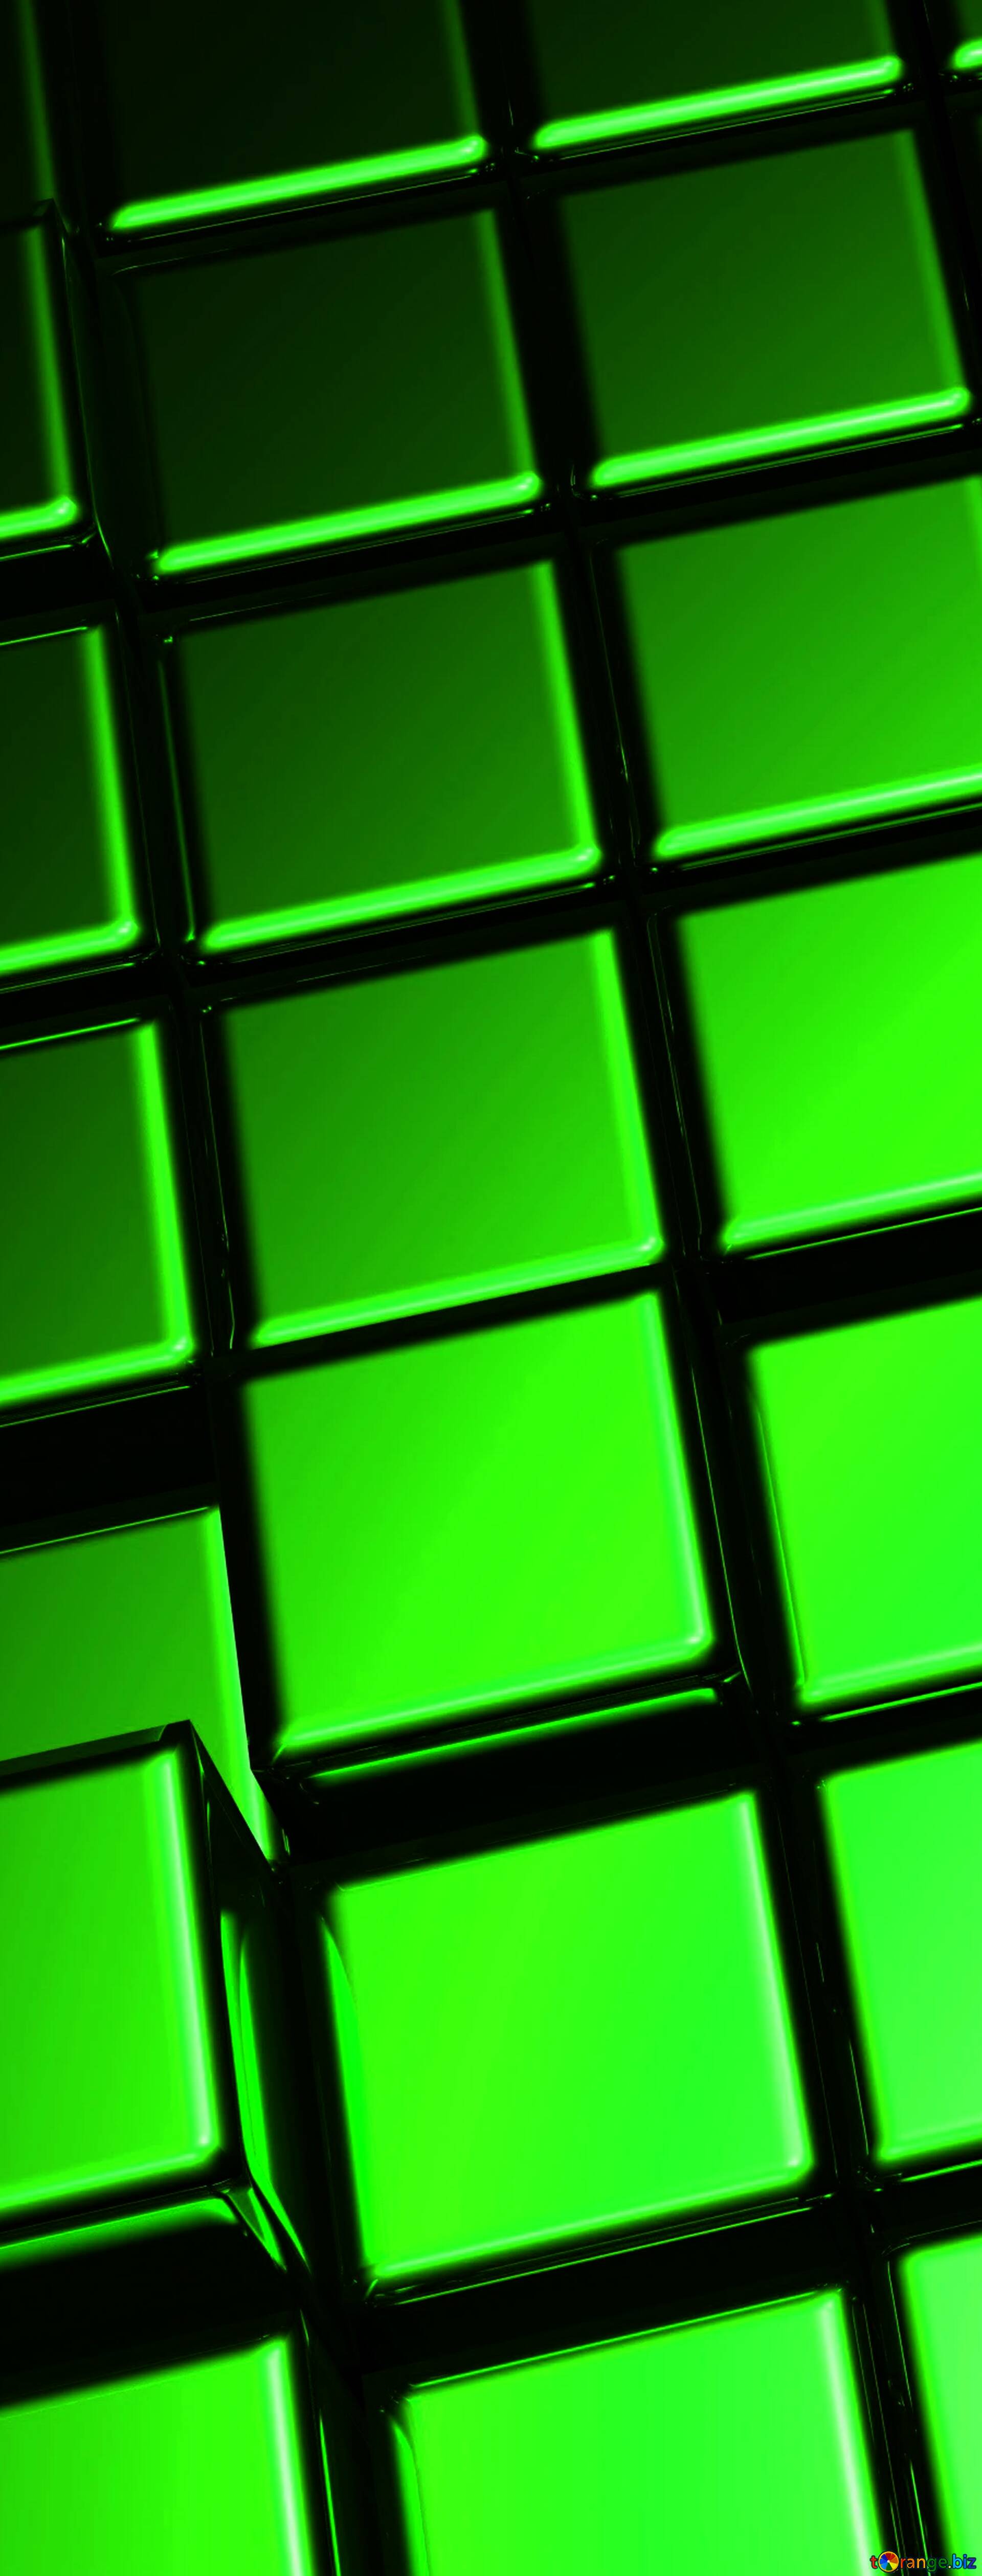 Download Free Picture 3d Abstract Green Metal Cube Boxes Vertical Banner Background On Cc By License Free Image Stock Torange Biz Fx